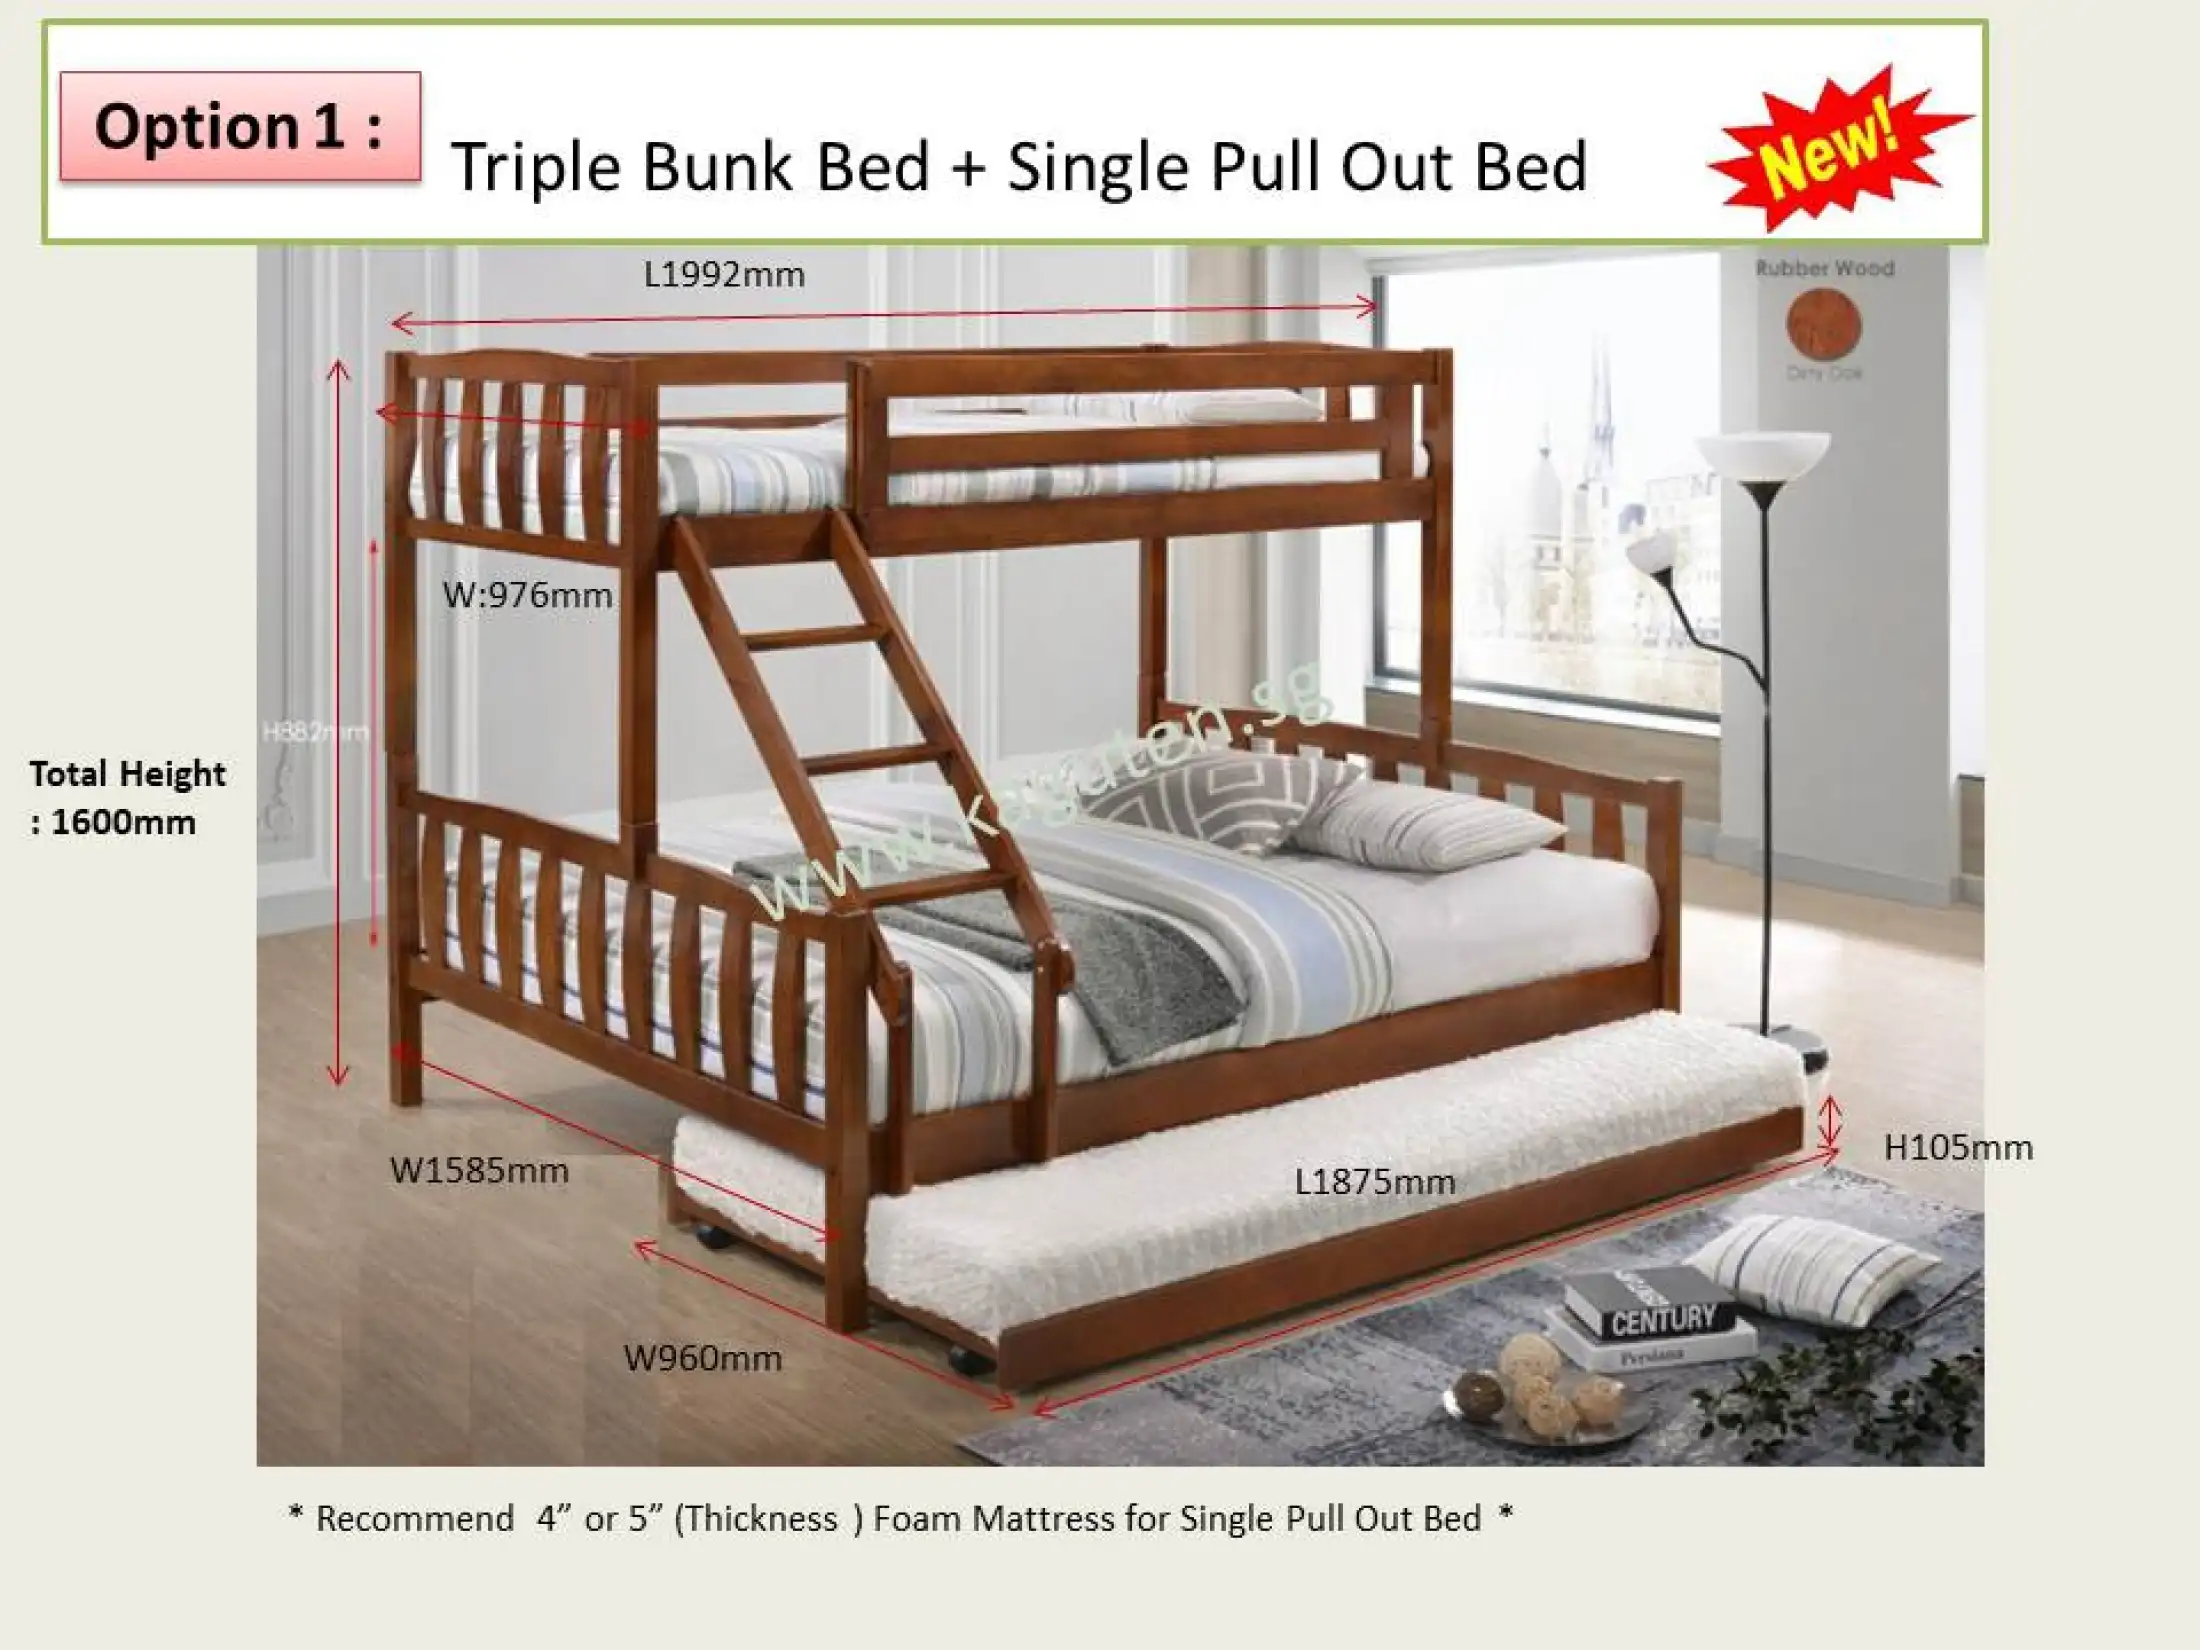 Wooden Bunk Bed Triple Free, Bunk Bed Images Free